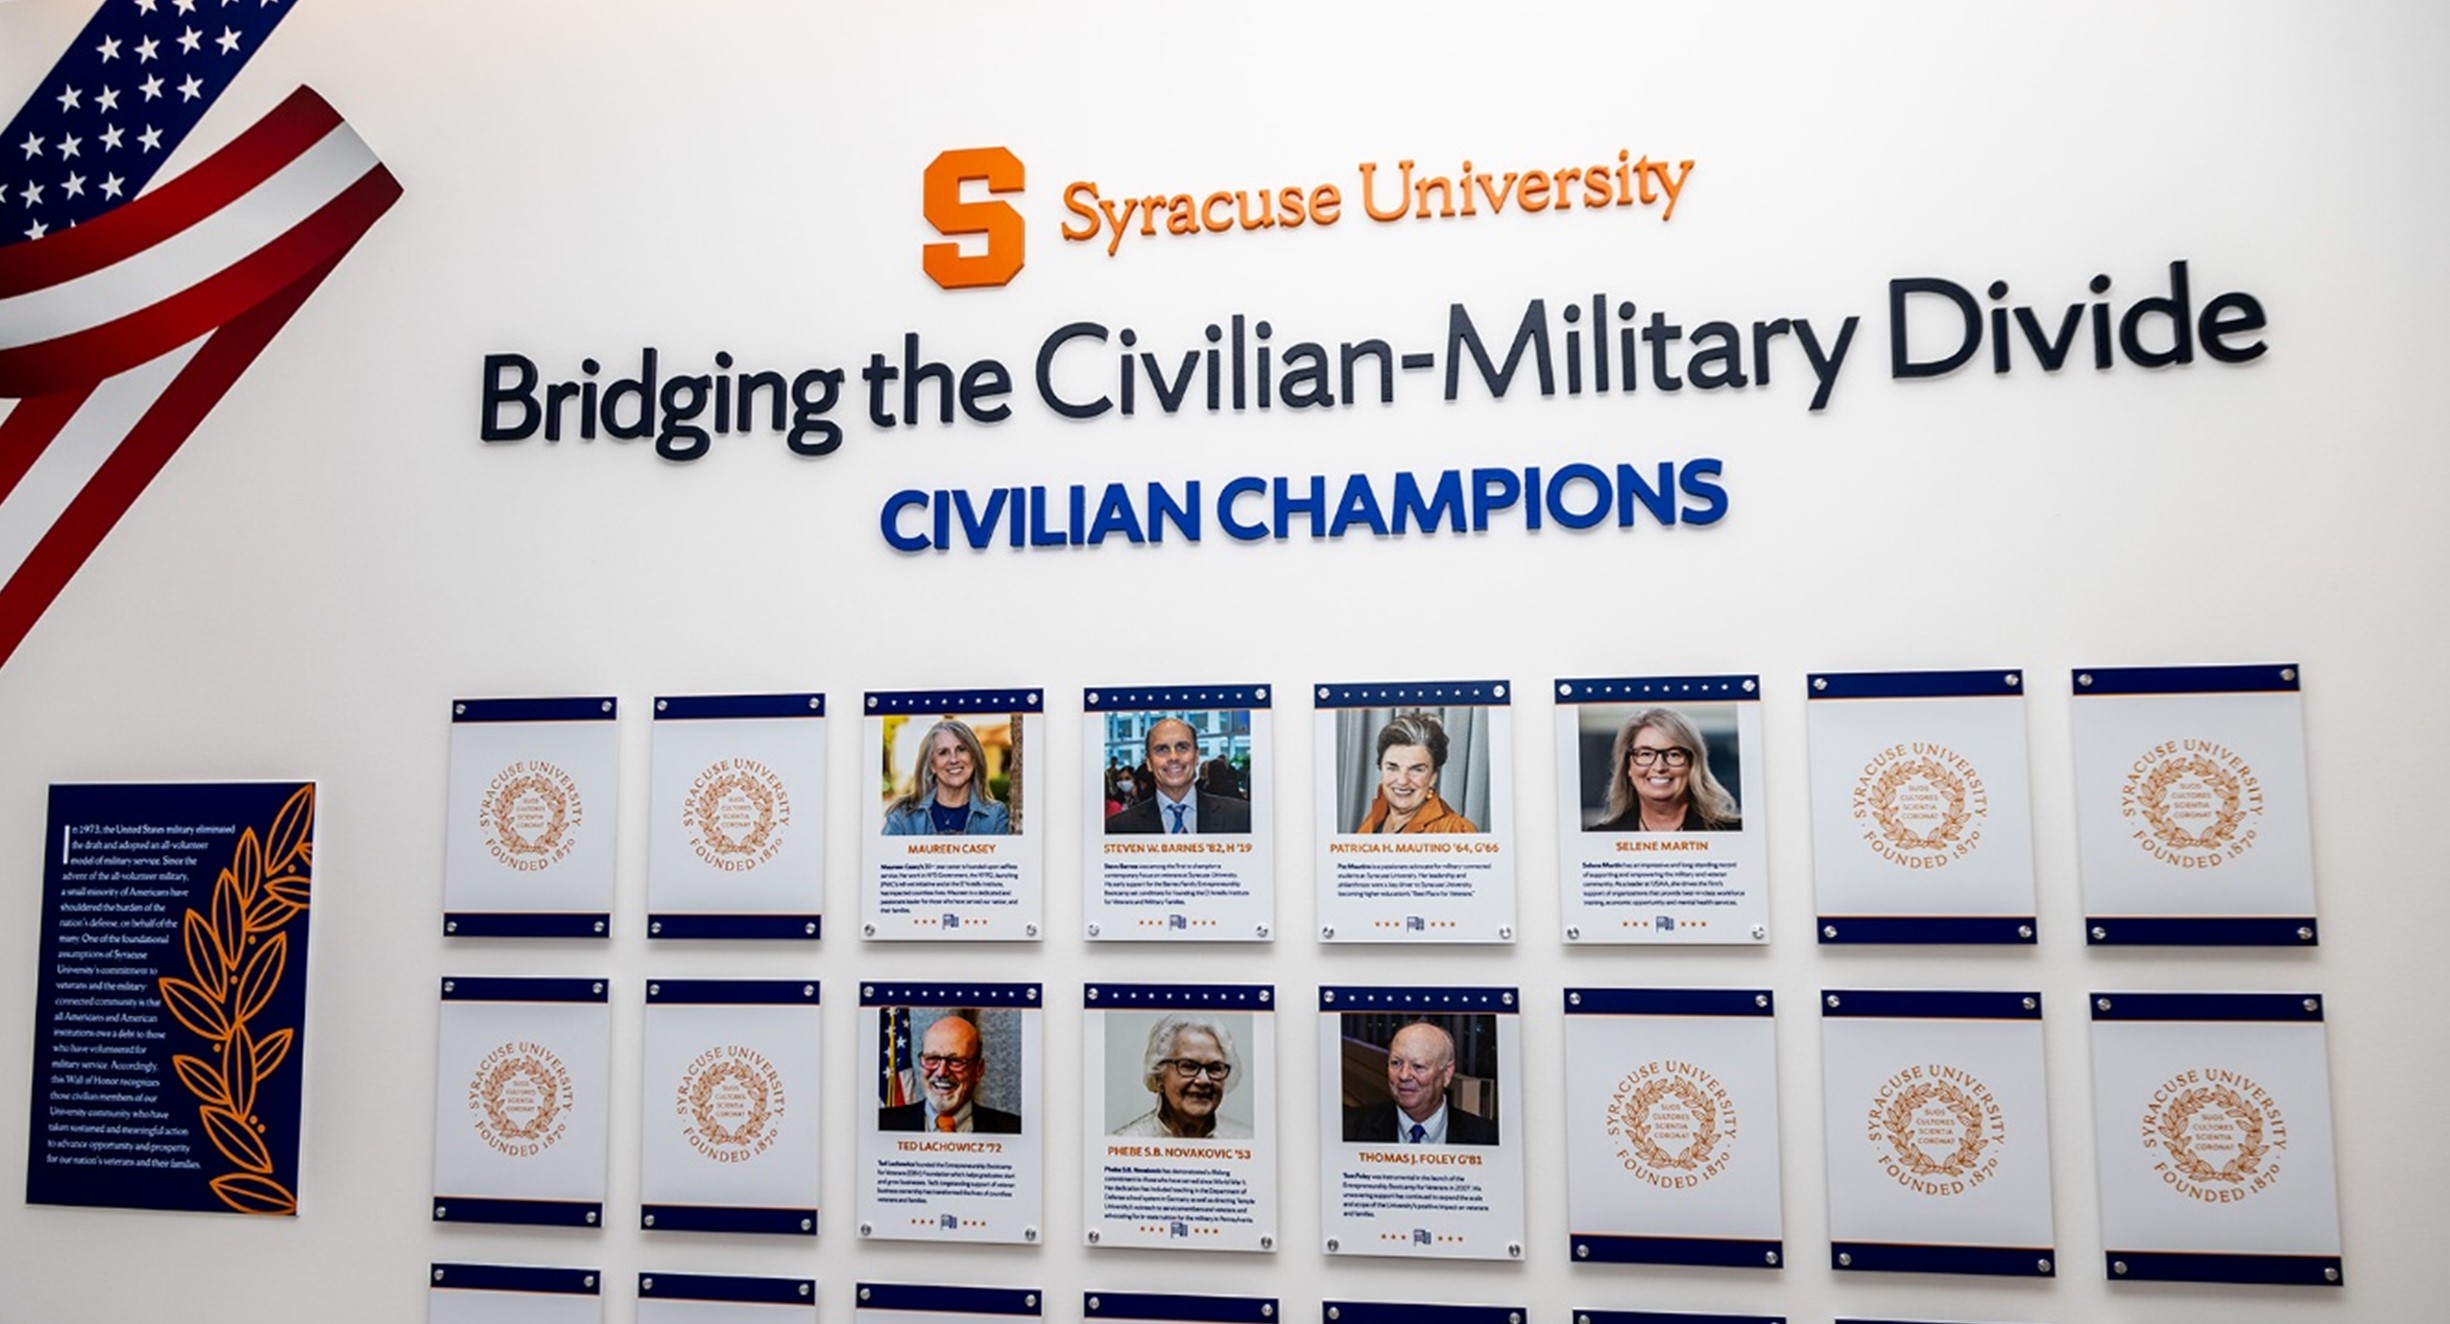 wall with plaques that states Syracuse University, Bridging the Civilian-Military Divide, Civilian Champions